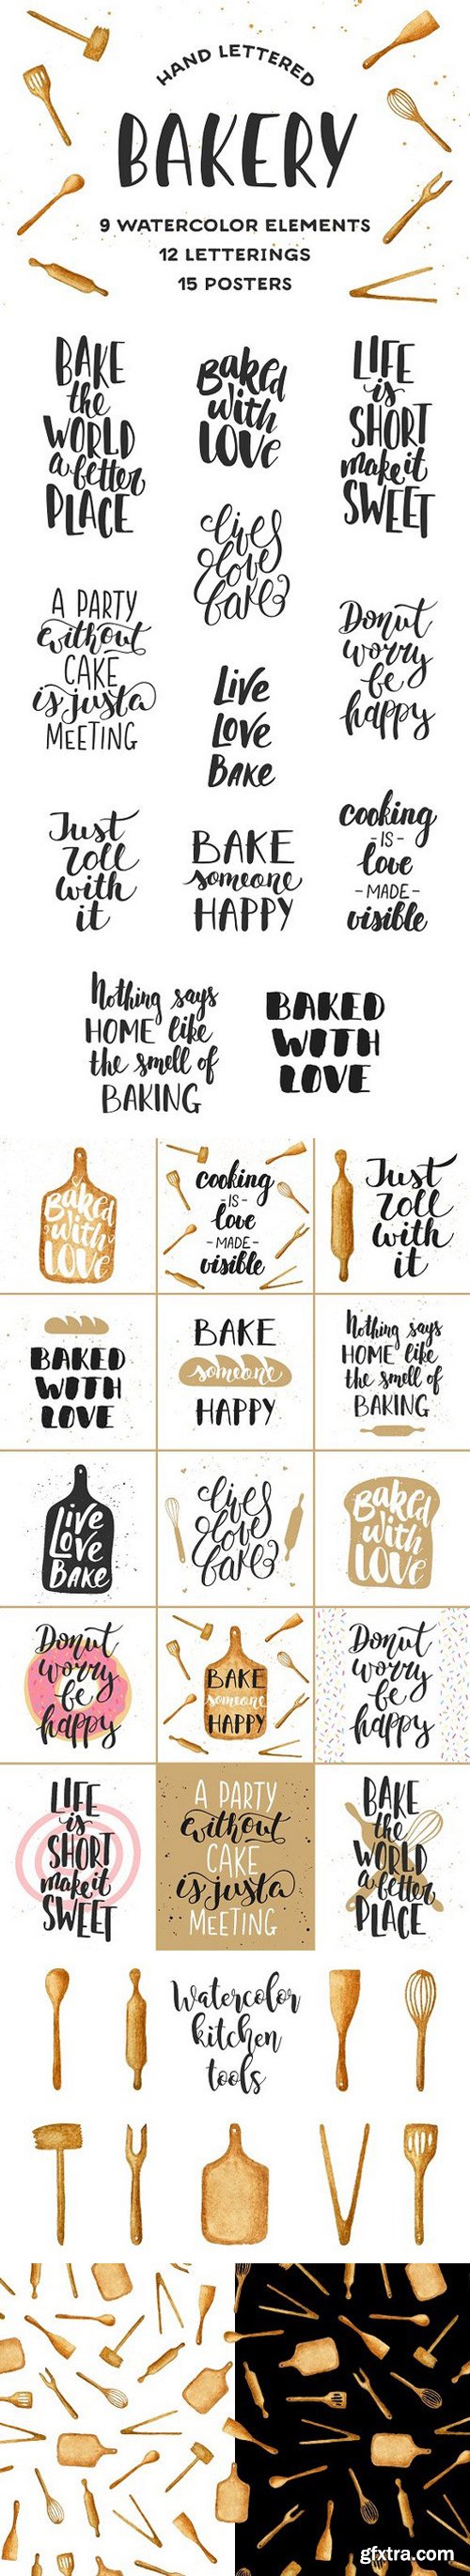 CM - Bakery quotes and posters 1617673